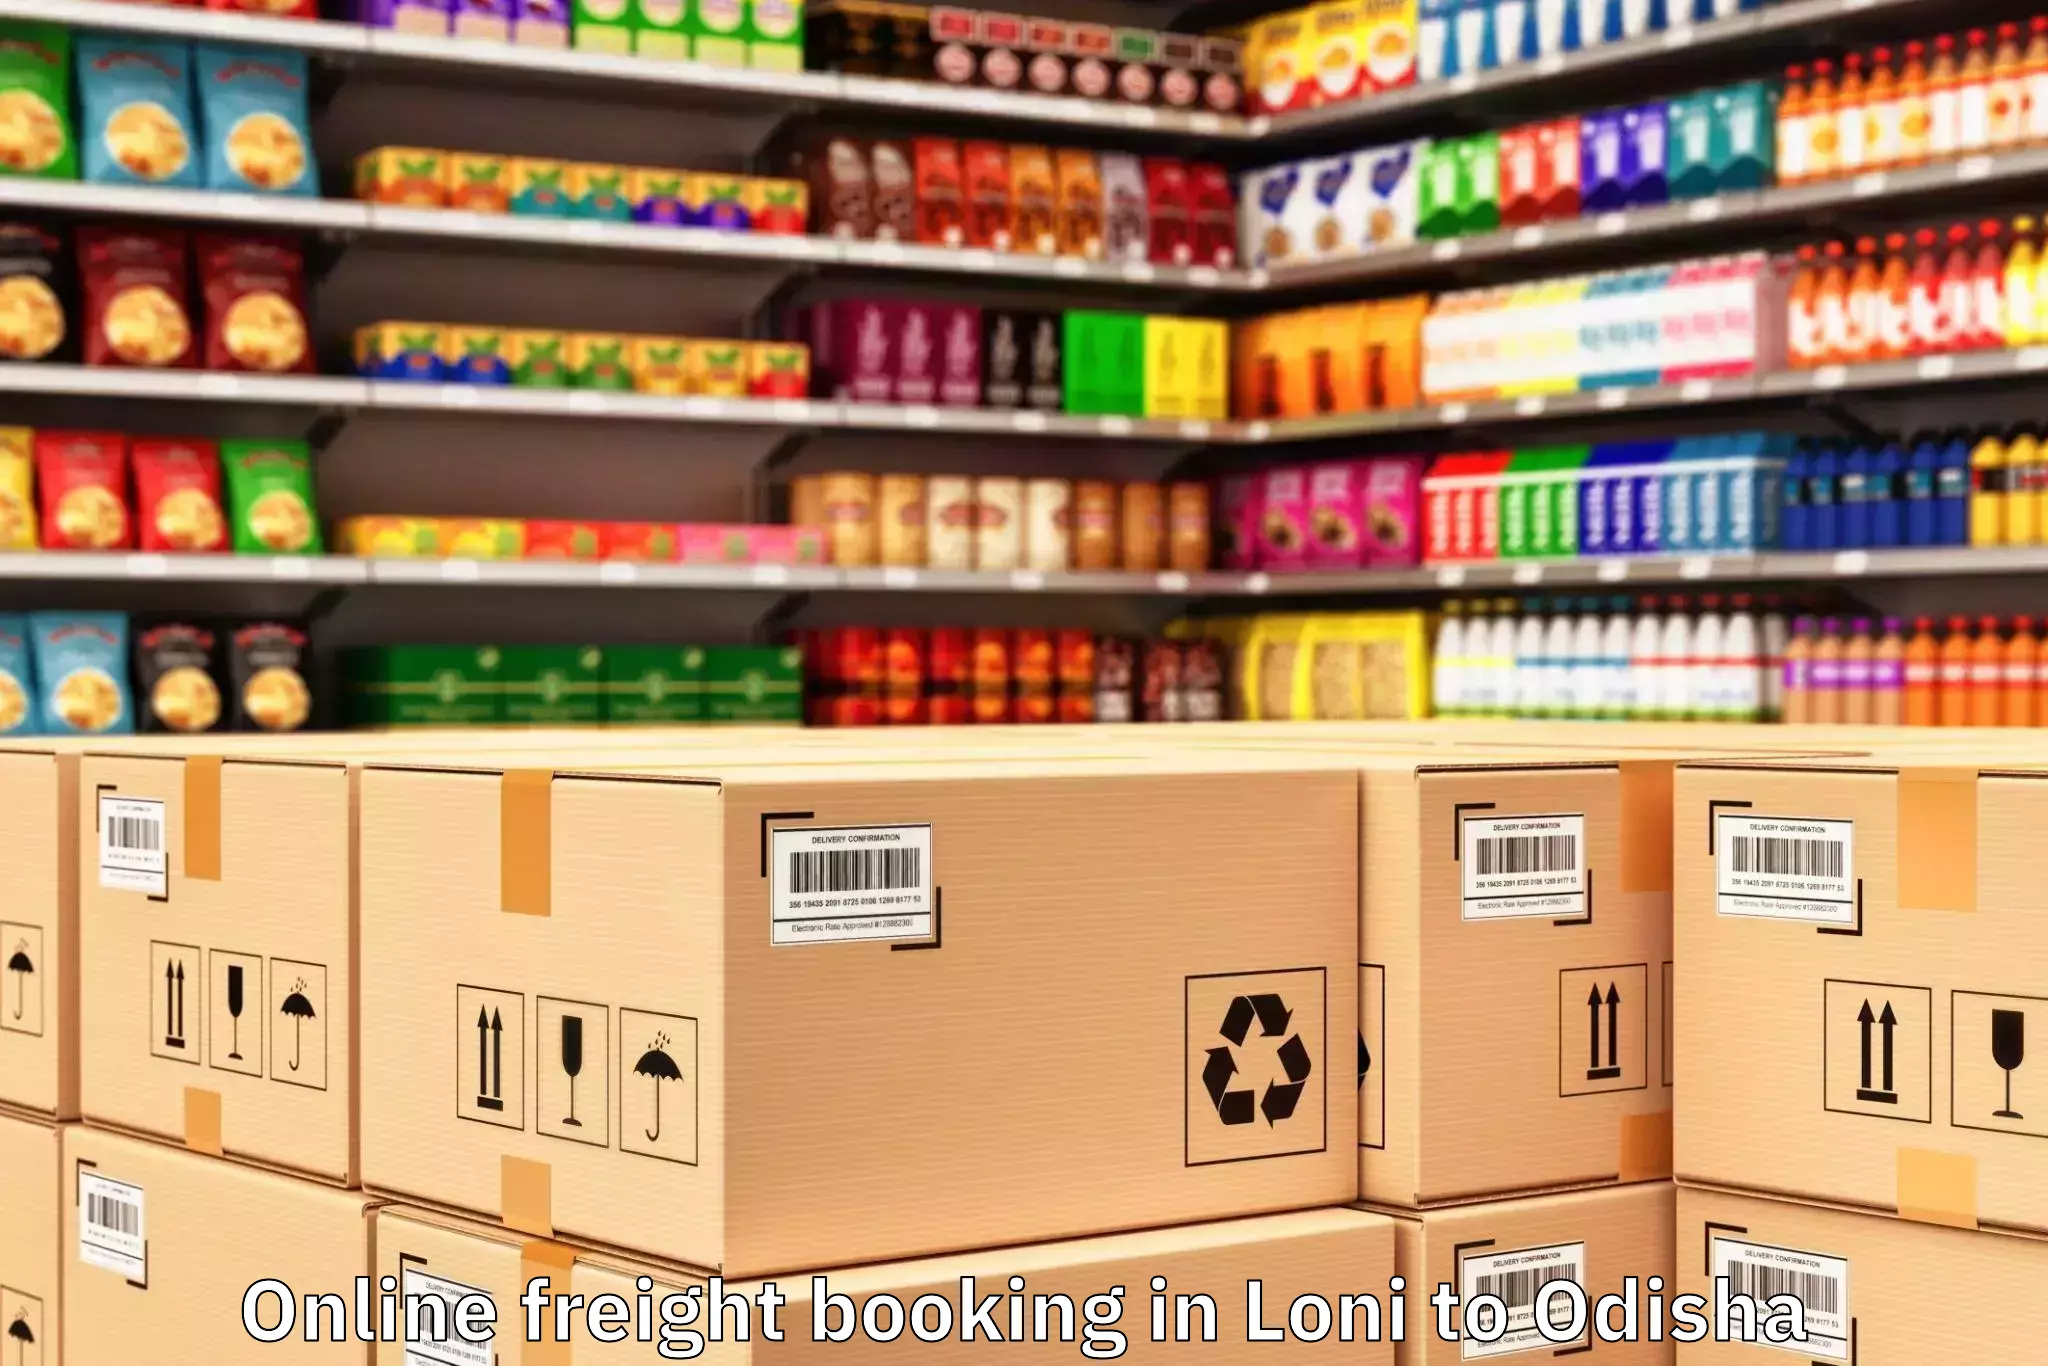 Discover Loni to Kujang Online Freight Booking